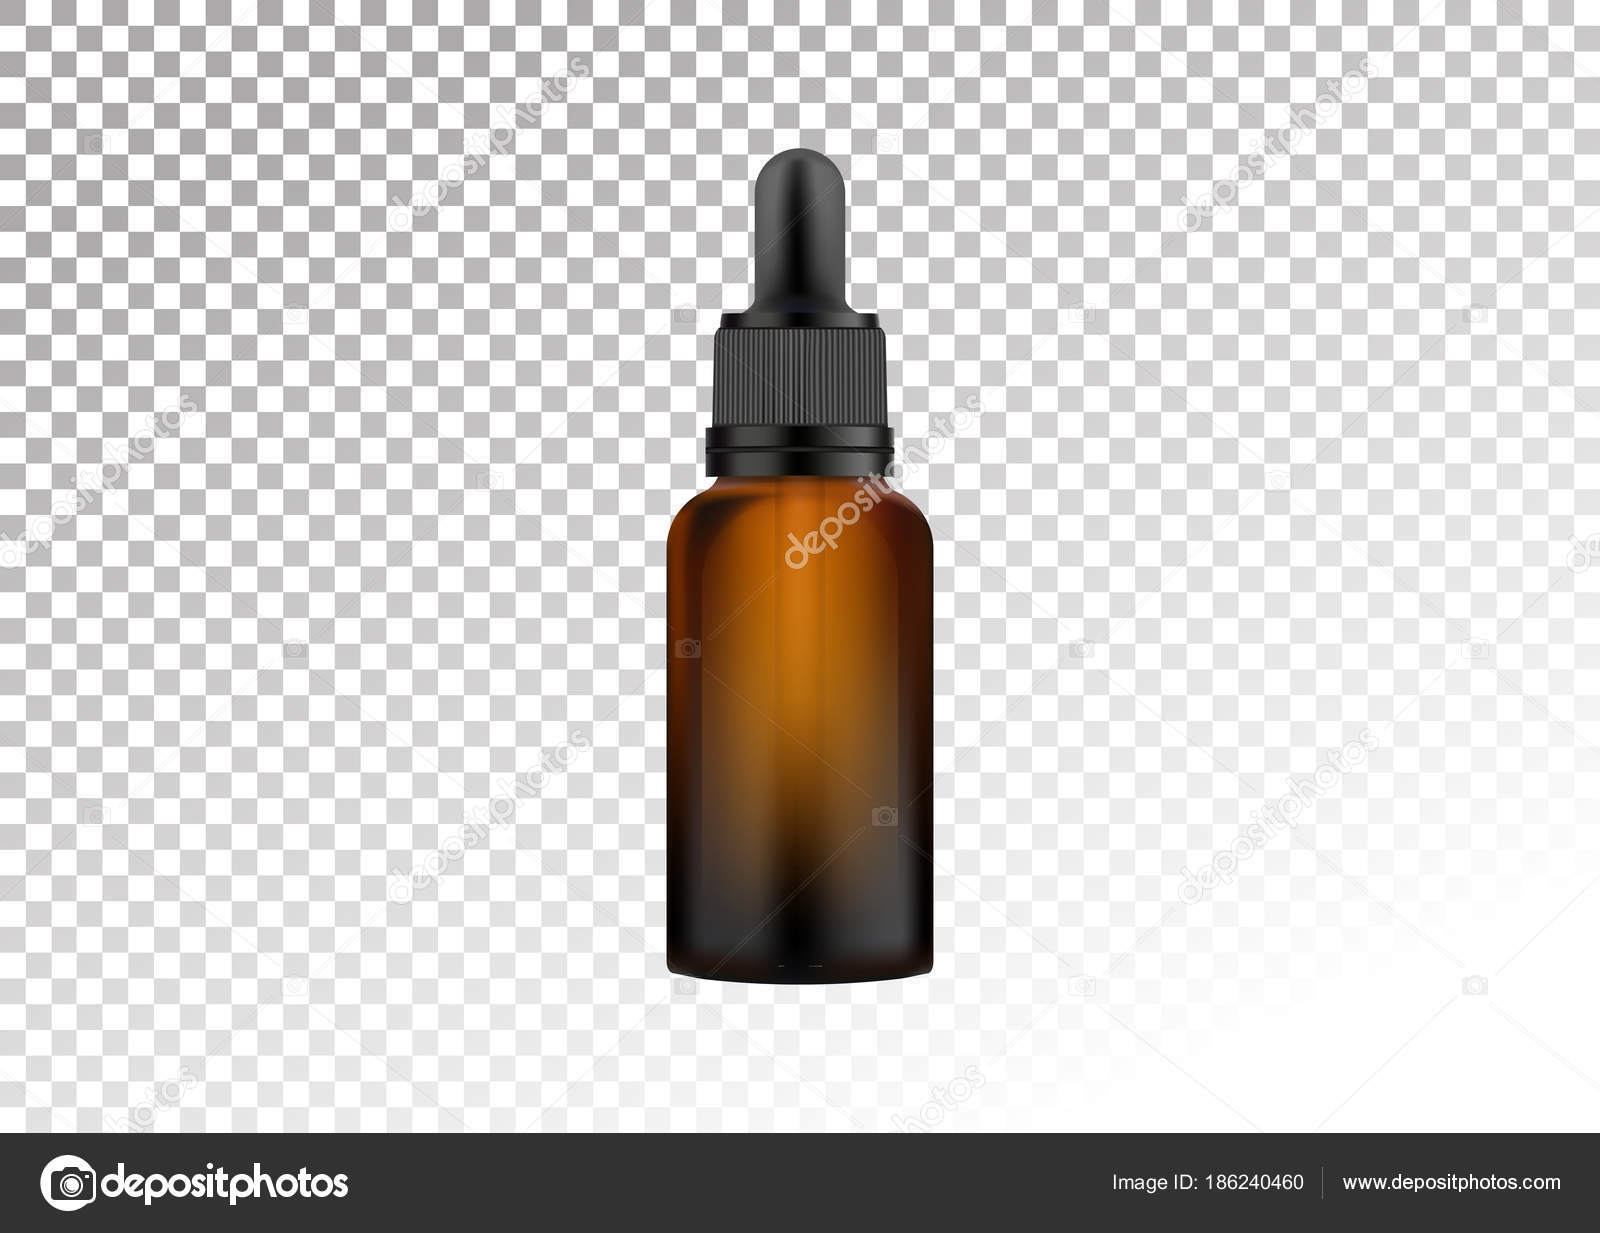 Download Vector Realistic Dark Glass Bottle With Pipette For Drops Cosmetic Vials For Oil Liquid Essential Collagen Serum Vector Illustration Isolated On White Transparent Background Vector Image By C Wowanneta Vector Stock 186240460